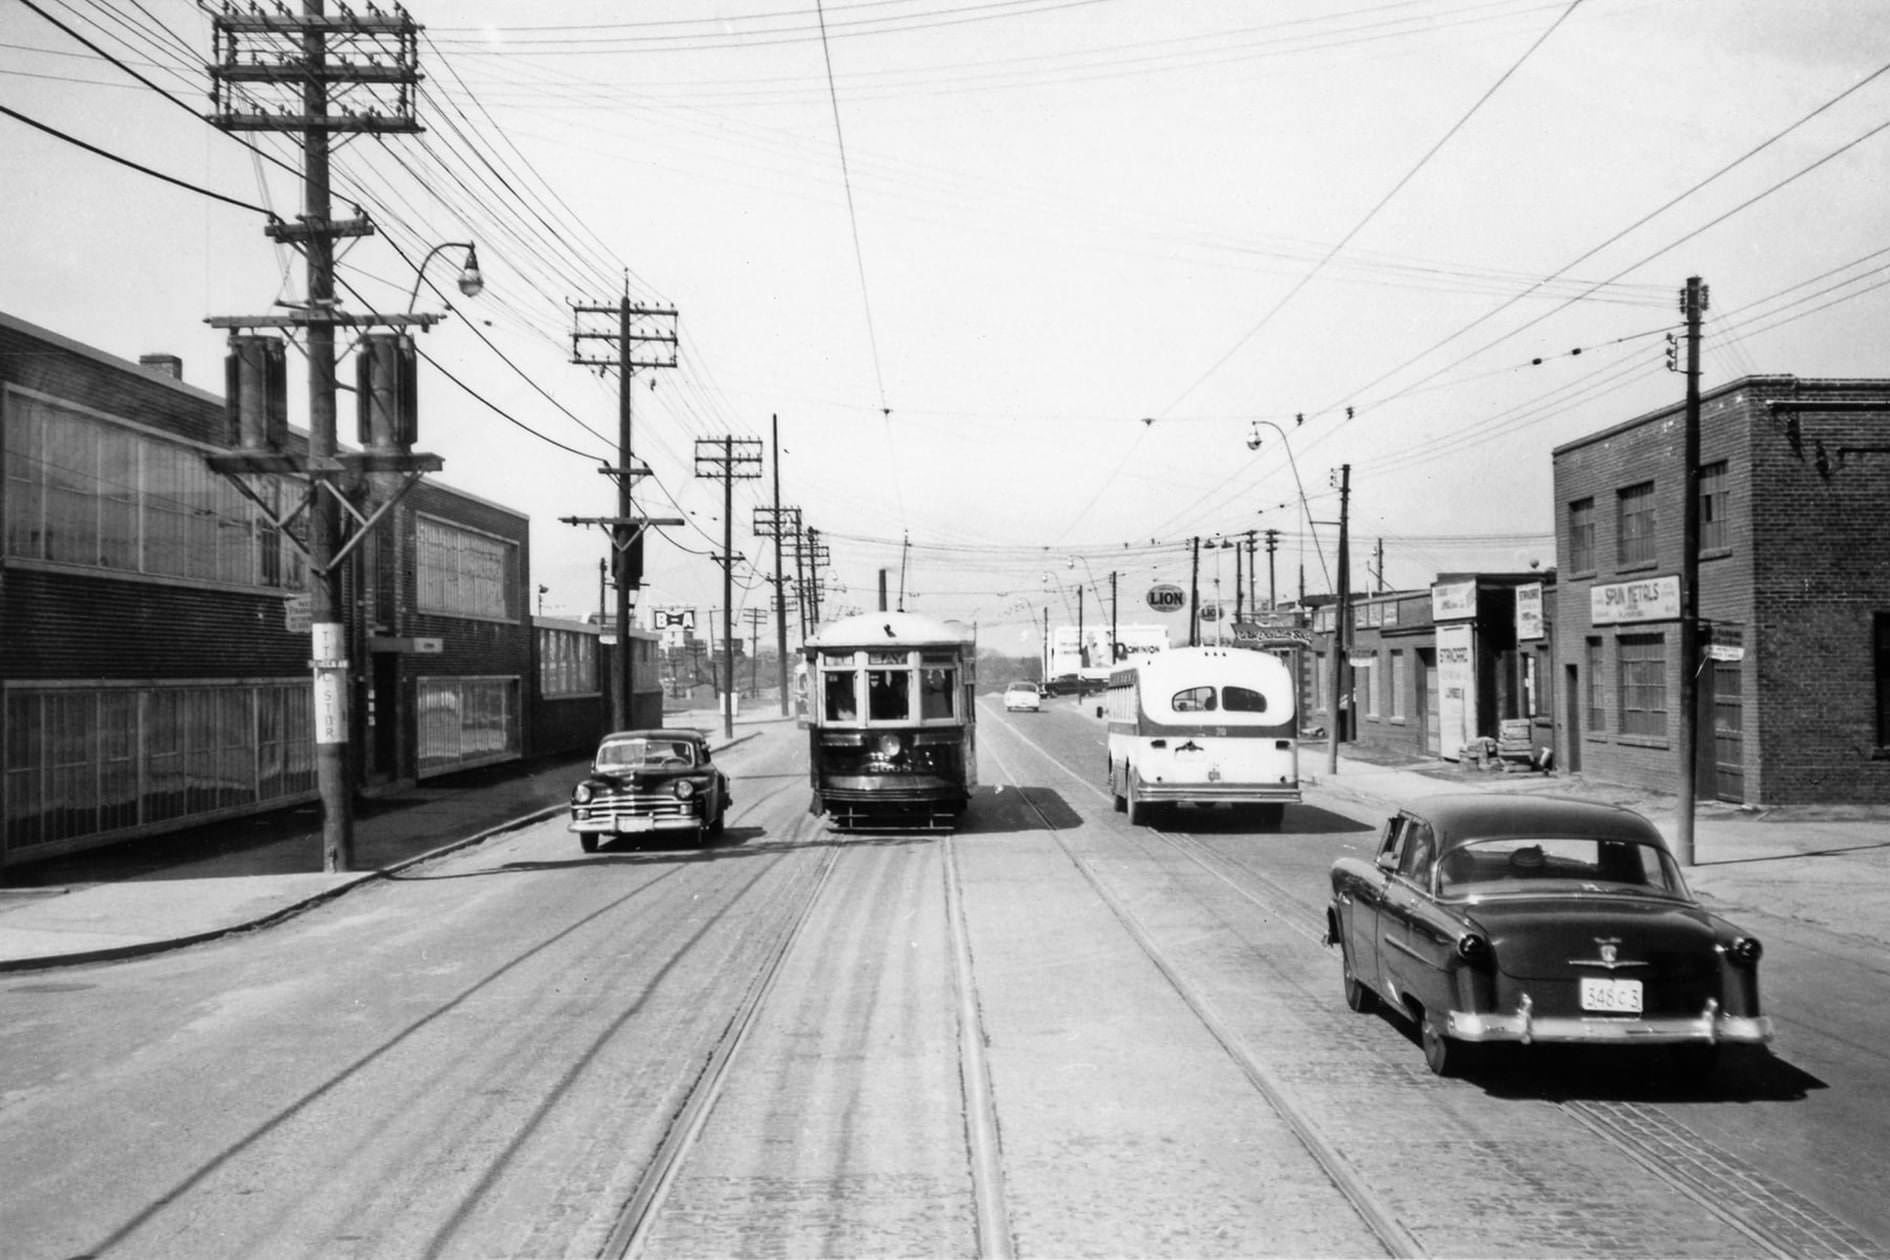 Looking north on Weston Road to Rogers Road, 1954.